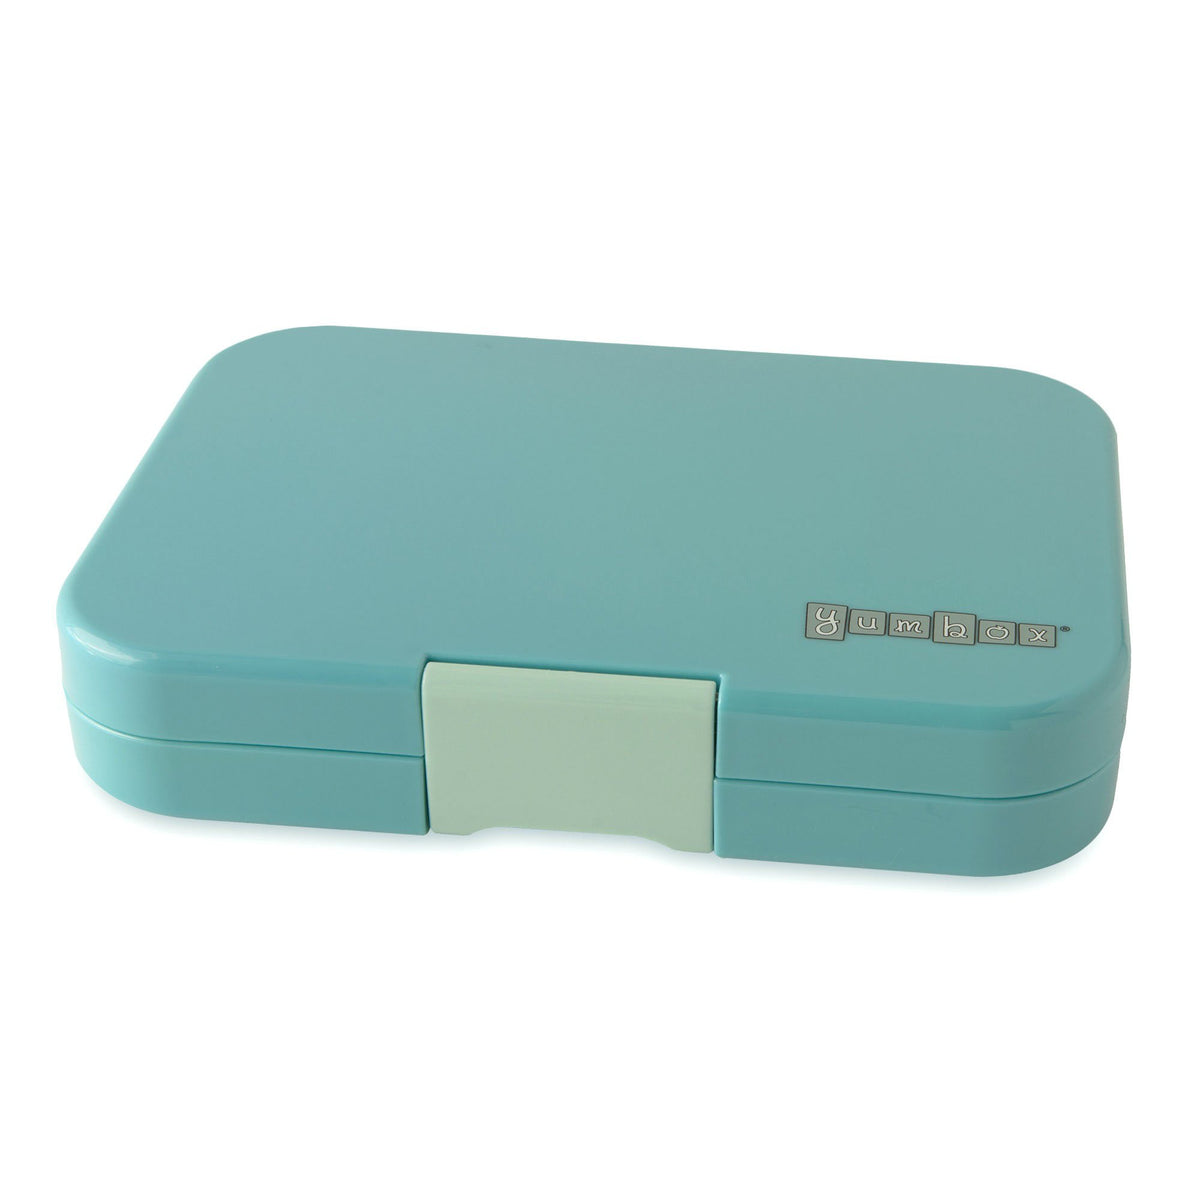 yumbox-tapas-antibes-blue-flamingo-4-compartment-lunch-box- (3)